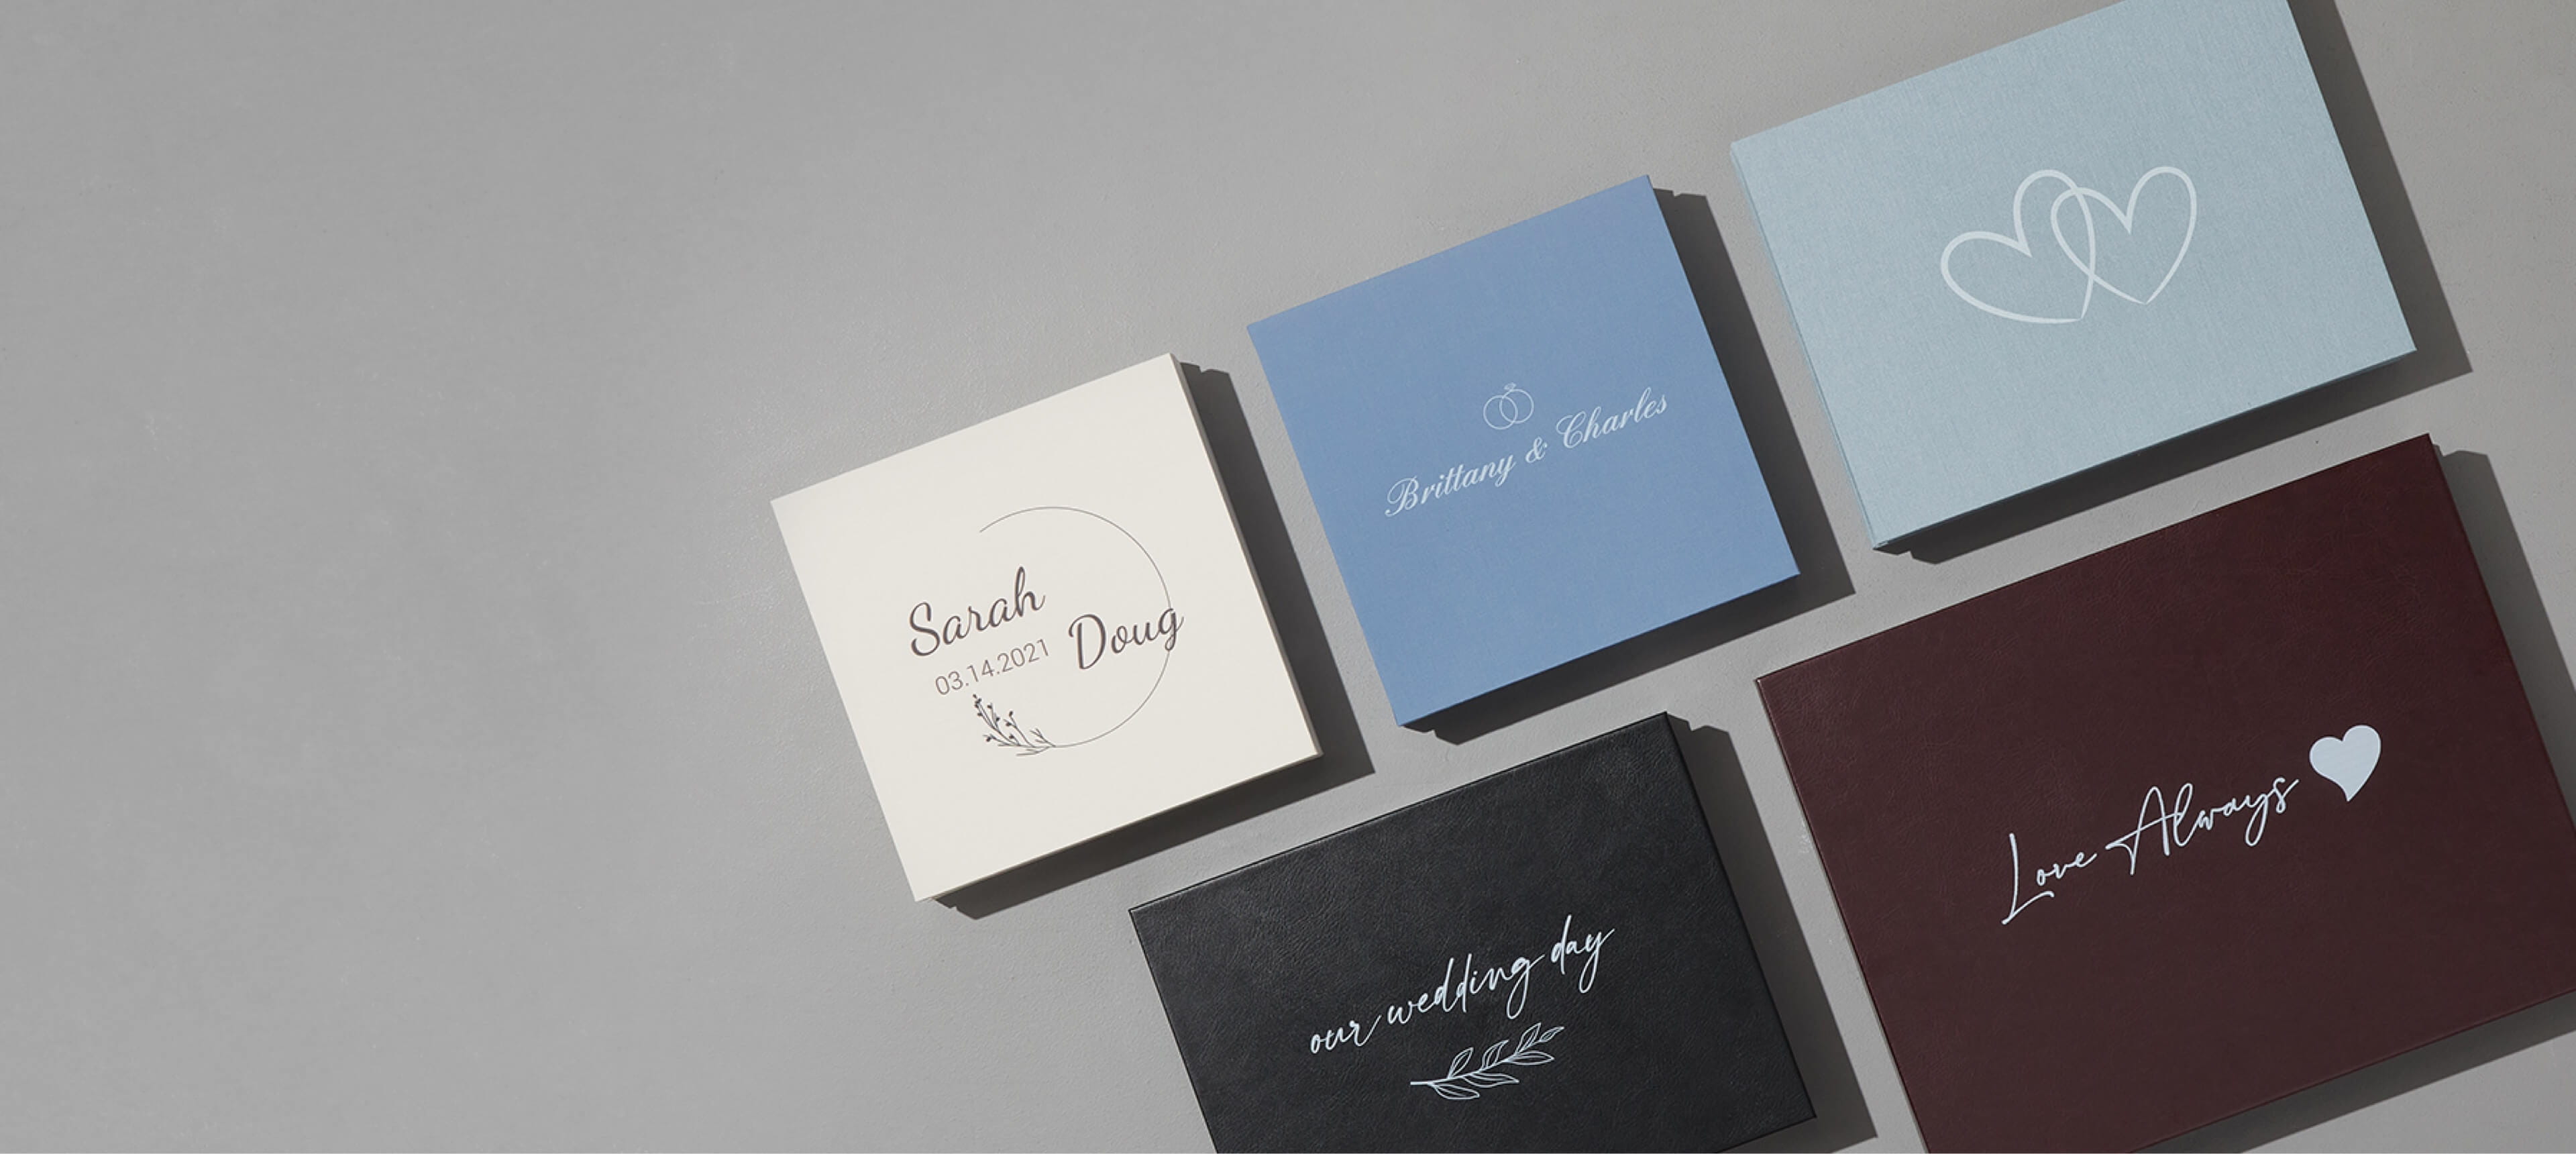 five design boxes with different uv printed designs on covers